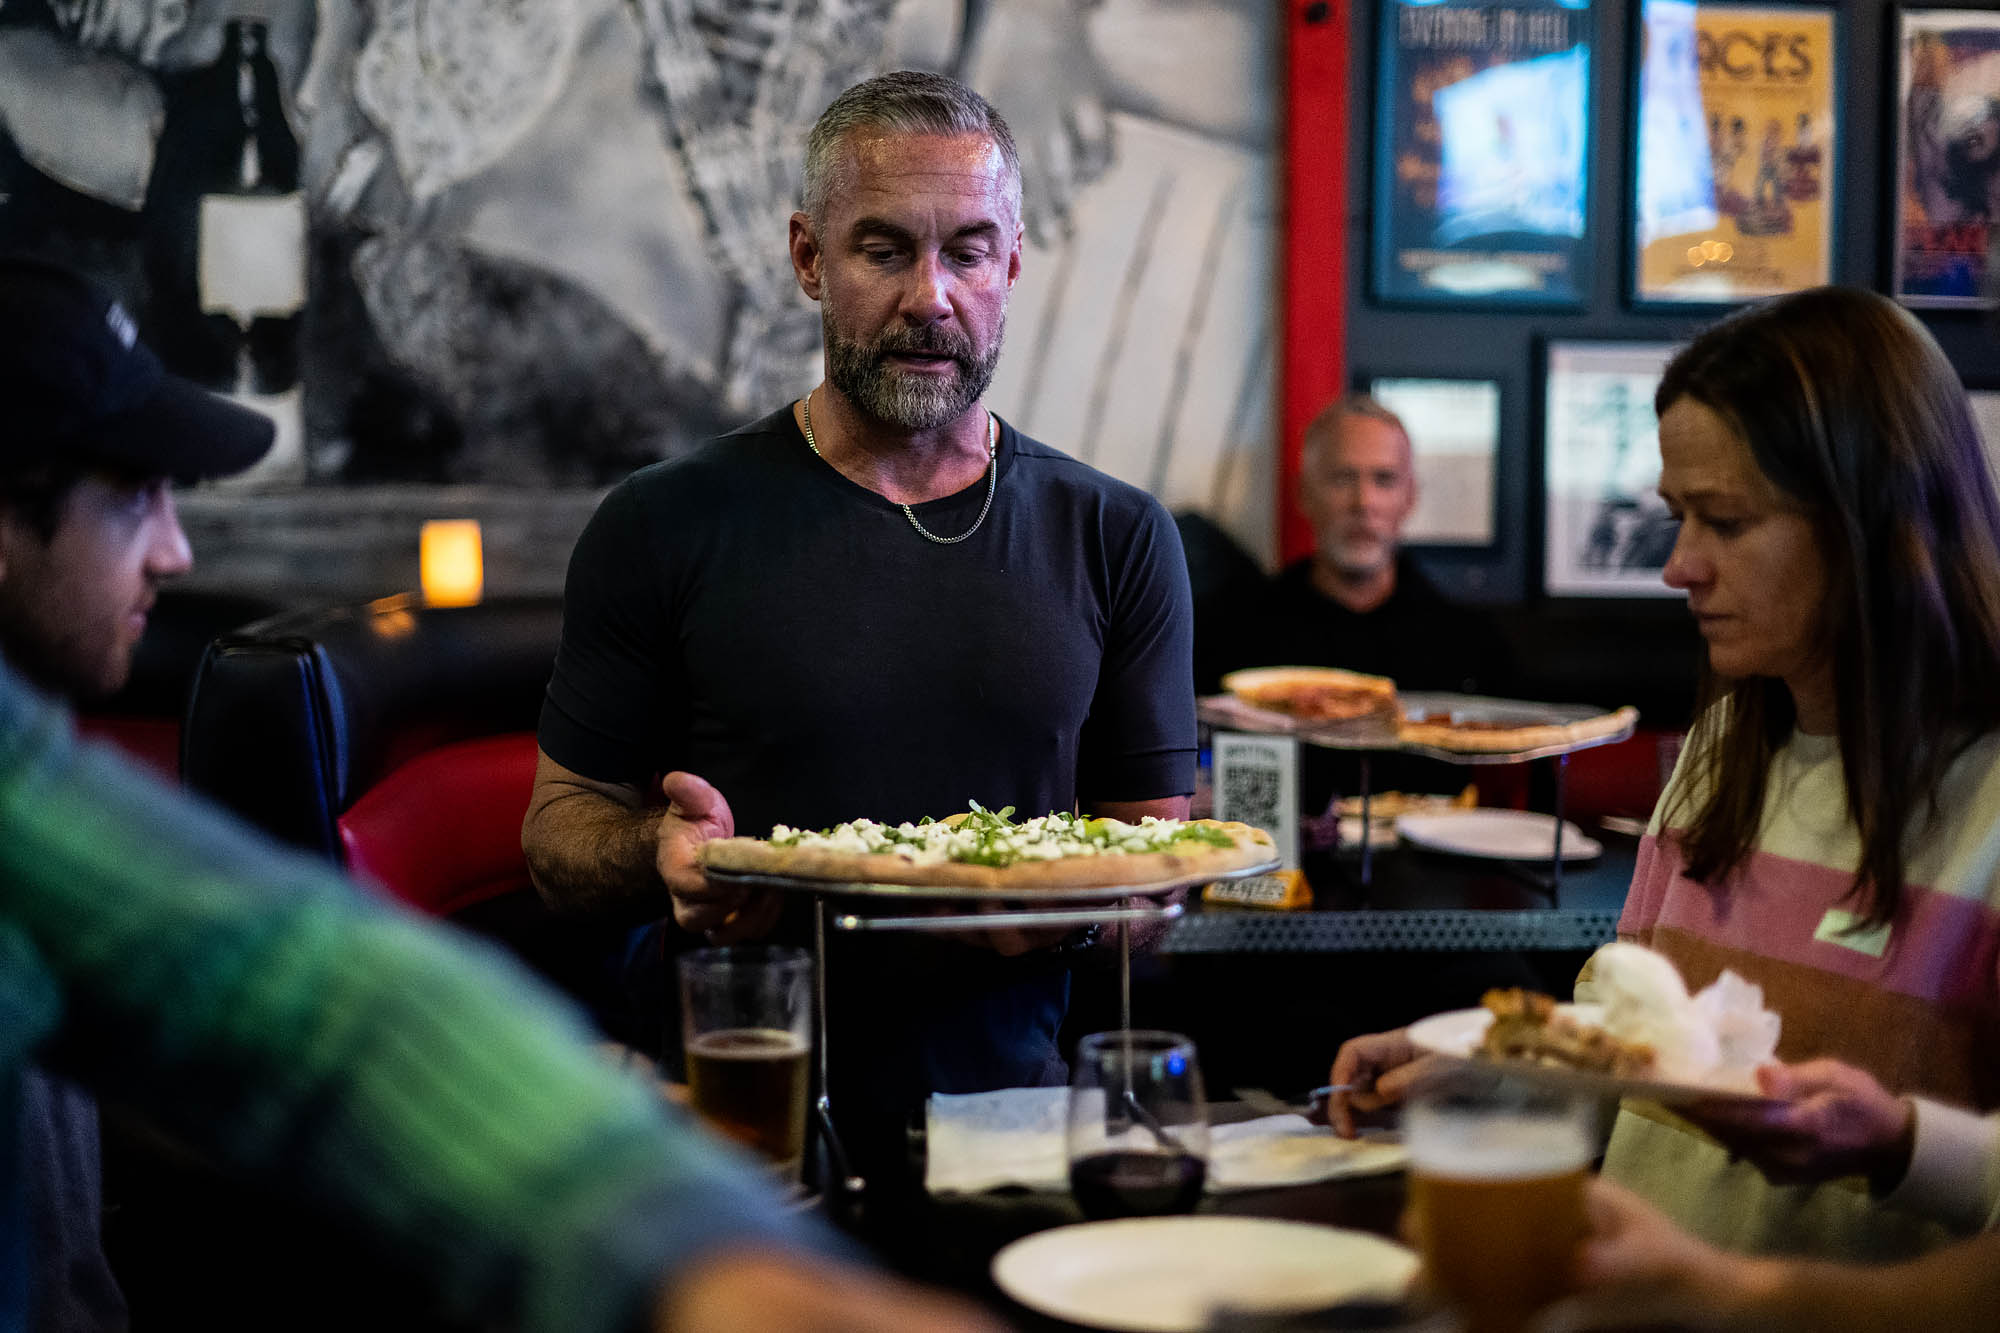 A man with silver hair and a dark t-shirt places a pizza on a table at a dark restaurant.